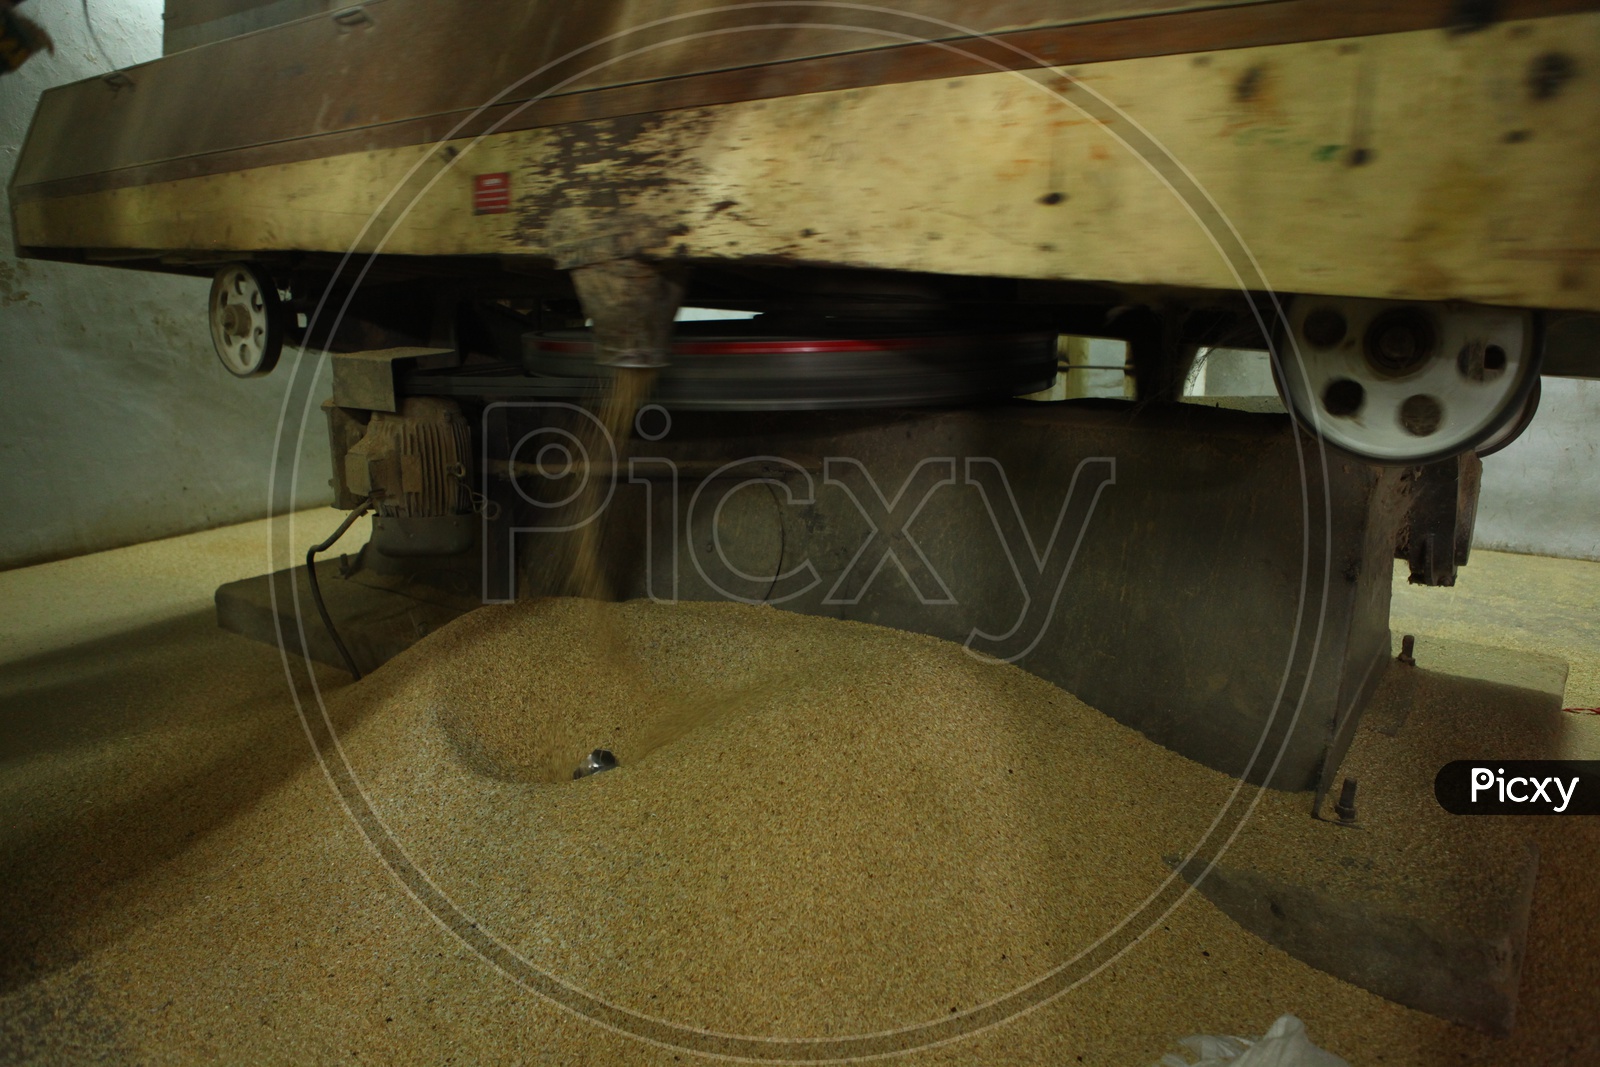 Broken rice coming out of nozzle from a machine in a rice mill